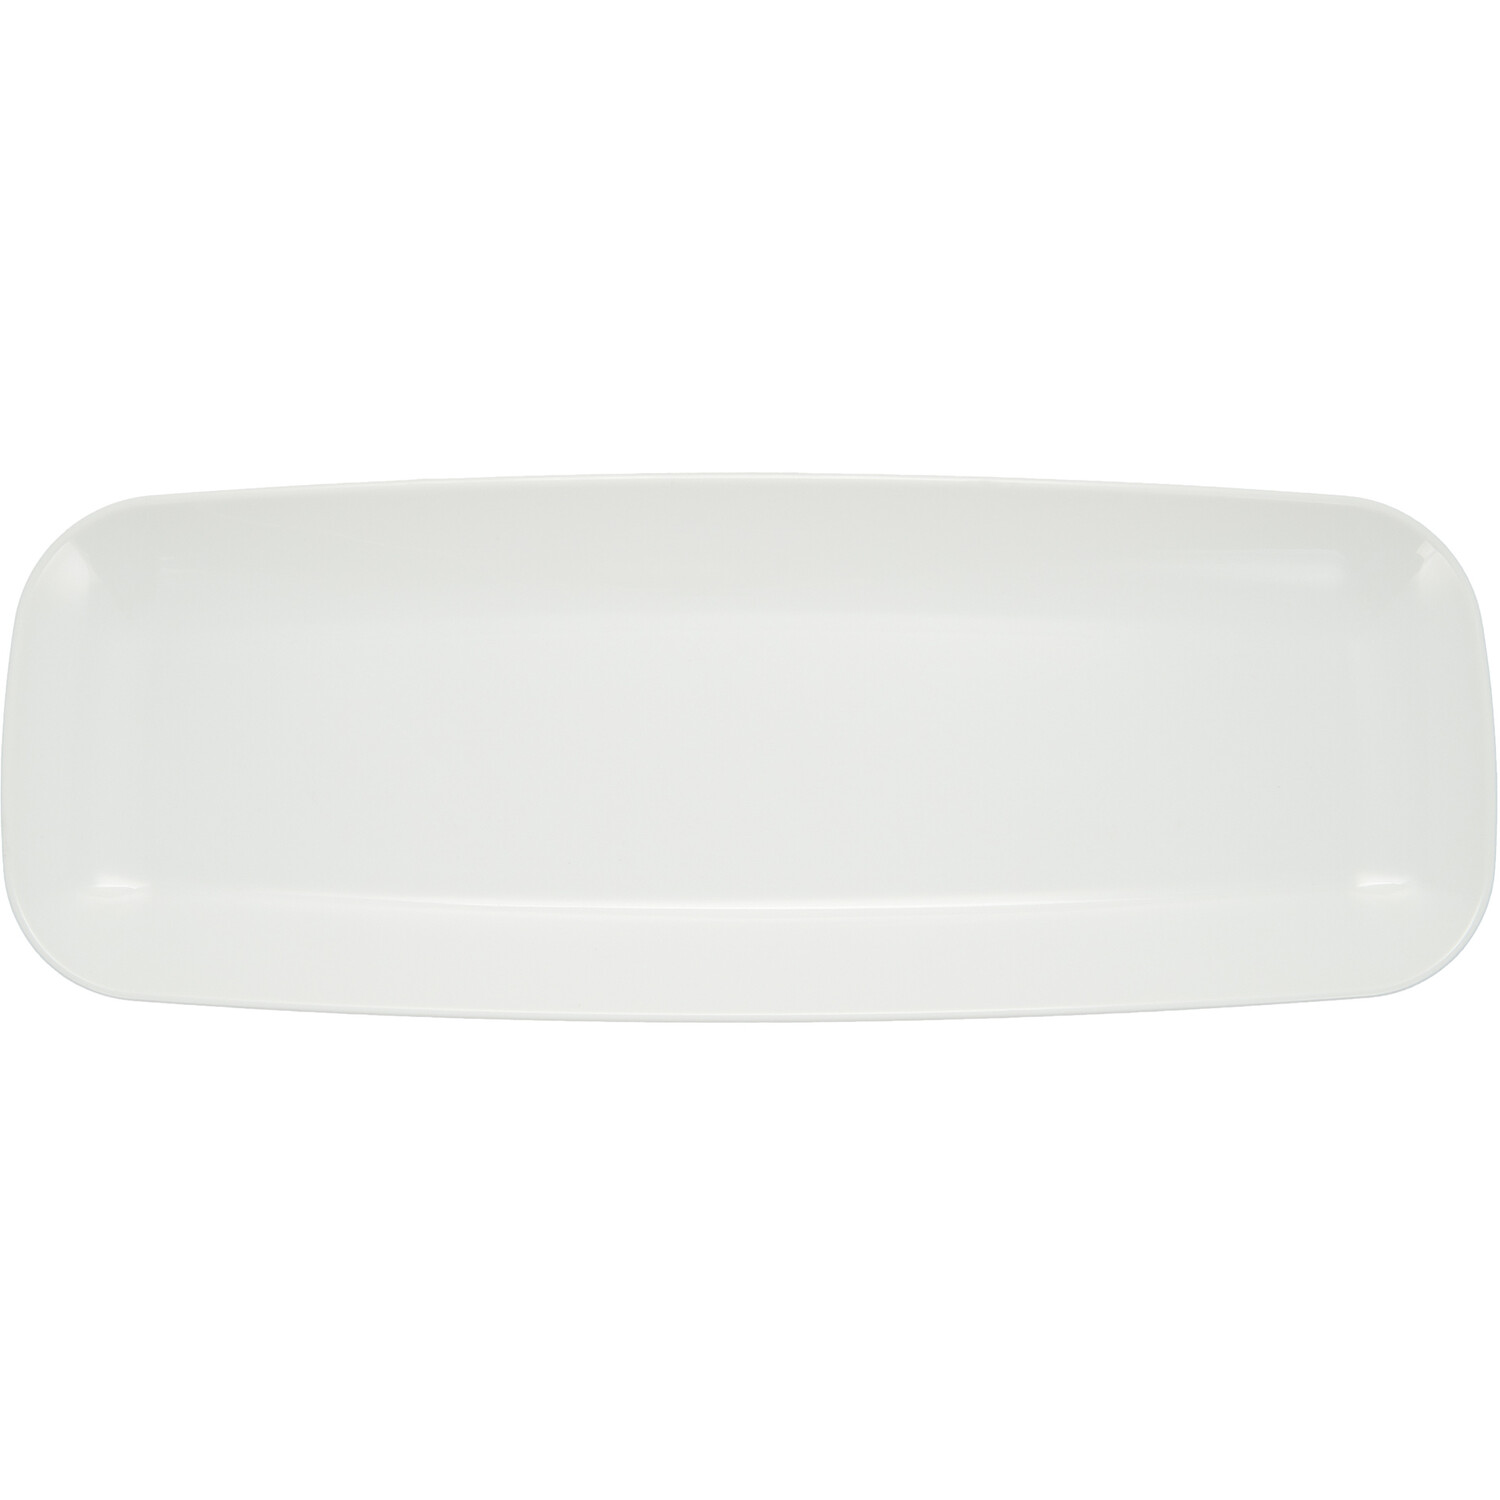 Pack of 2 Long Rectangle Serving Platters - White Image 2